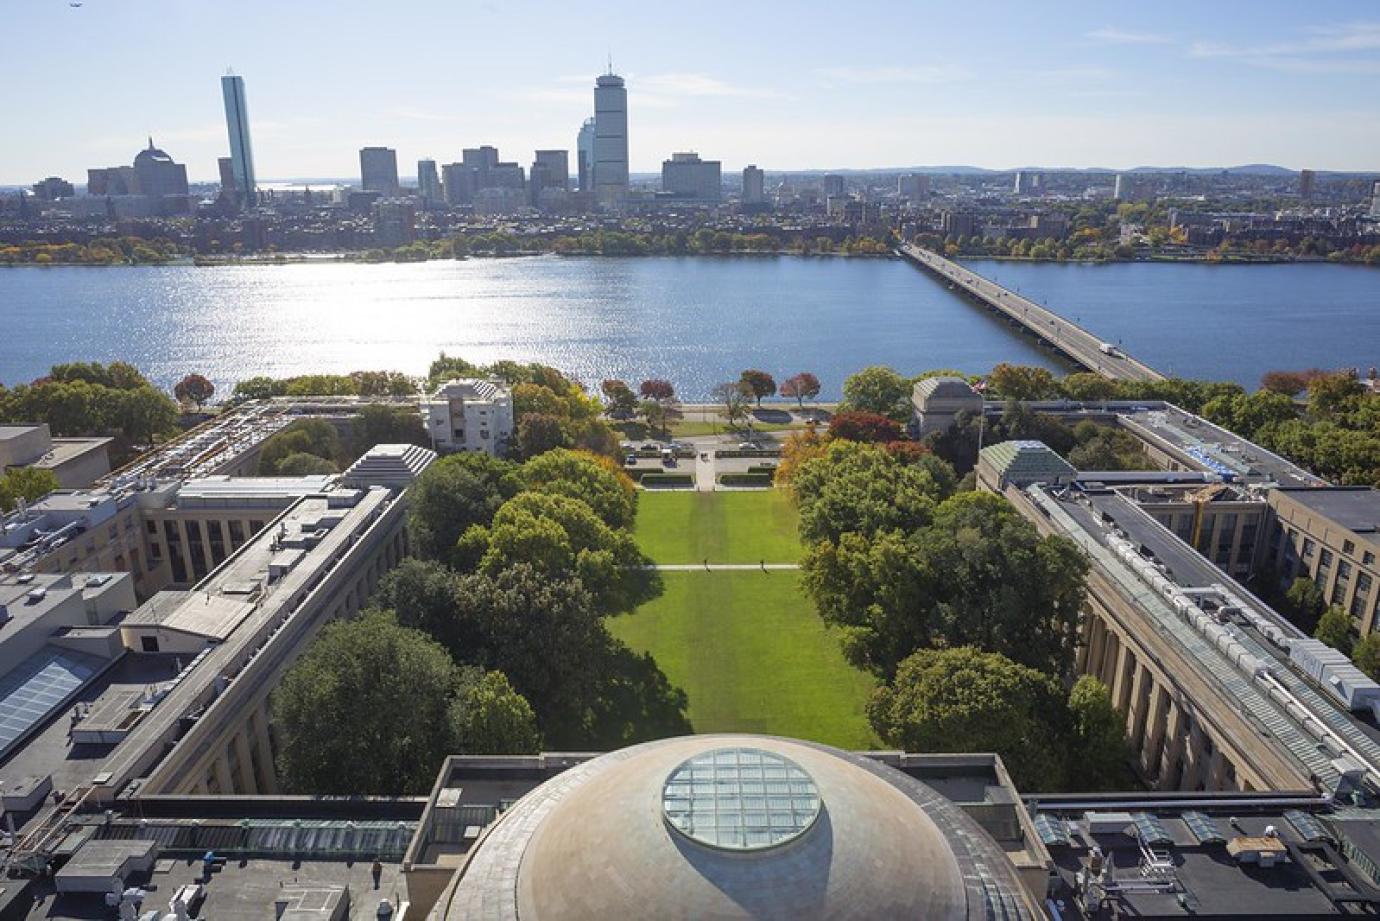 Aerial view of the MIT Dome with the Charles, River and Boston skyline in the distance.